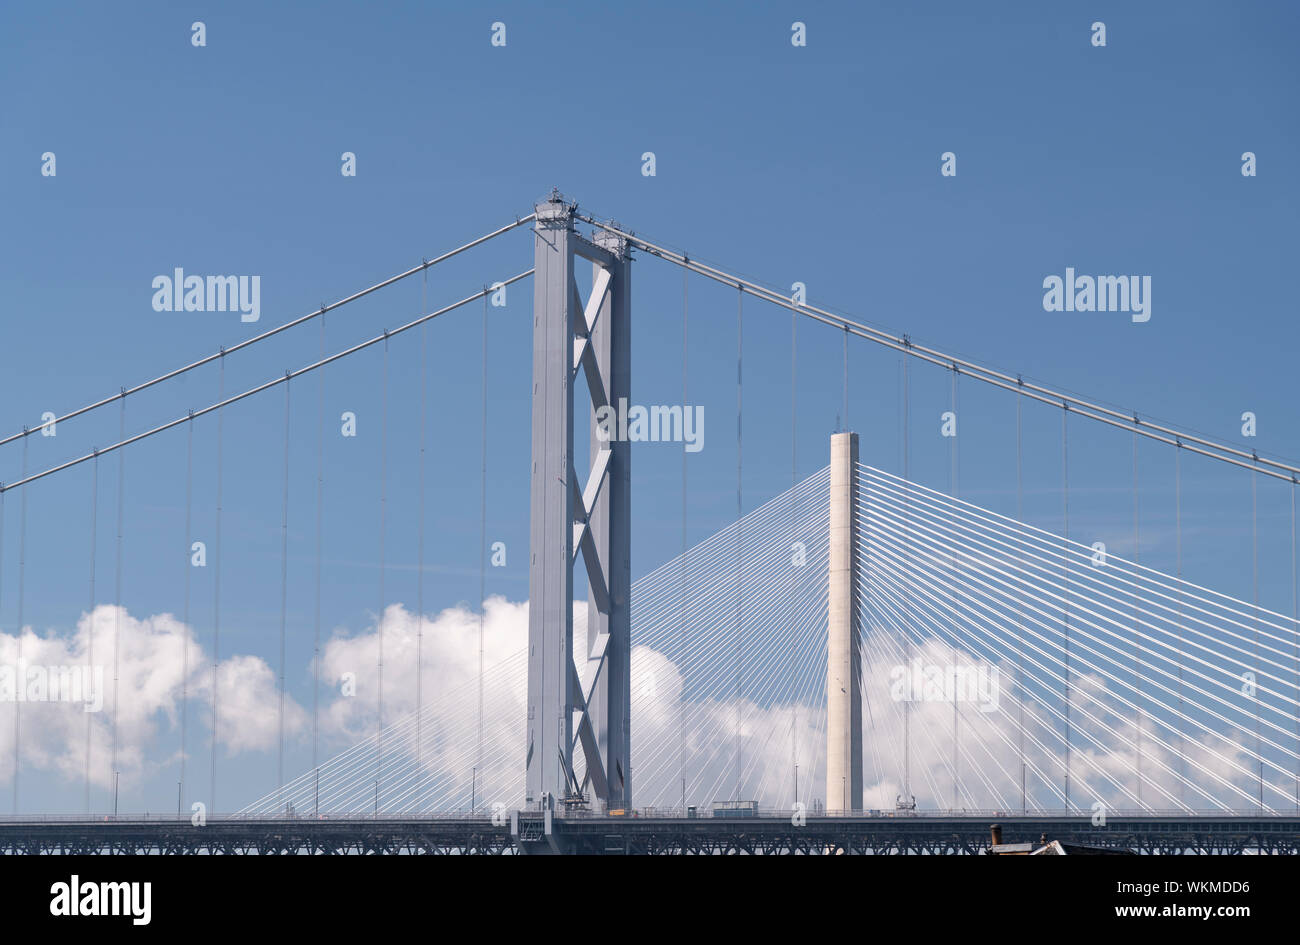 Towers of The Forth Road Bridge and The Queensferry Crossing, Firth of Forth, Scotland Stock Photo